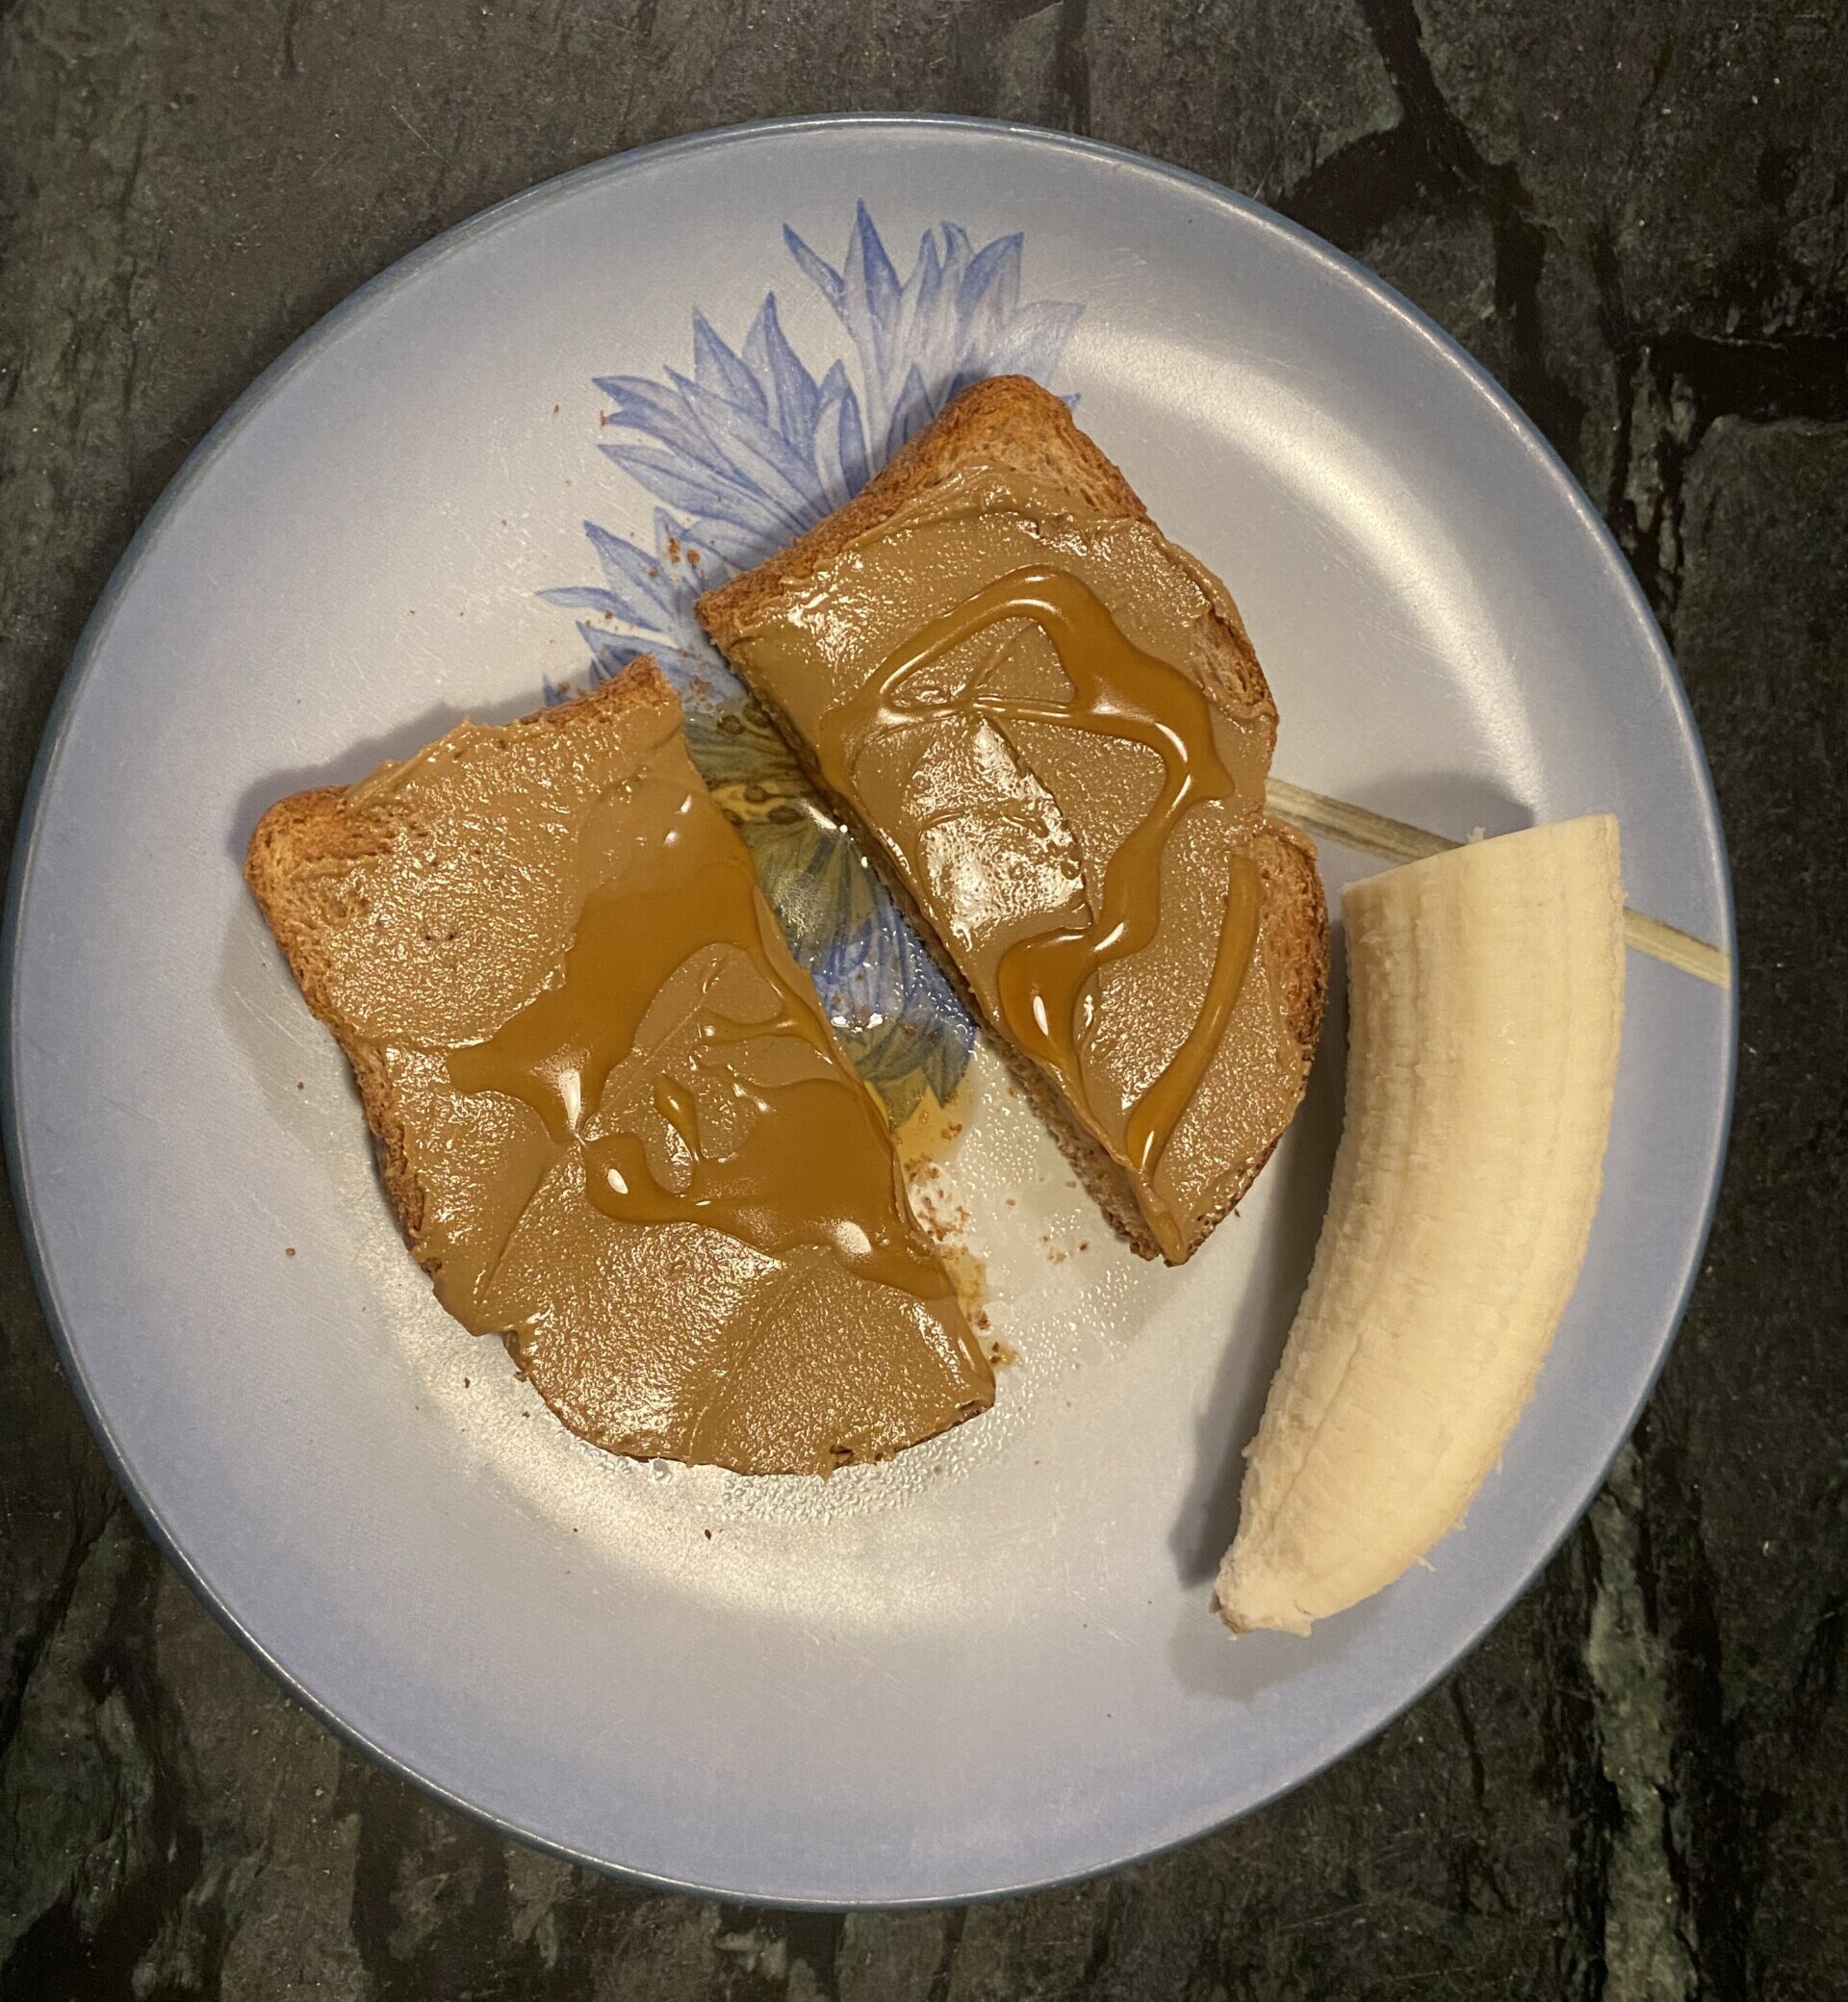 Blue plate with a piece of toast topped with sunflower seed butter and honey, and a half of a banana on the side.